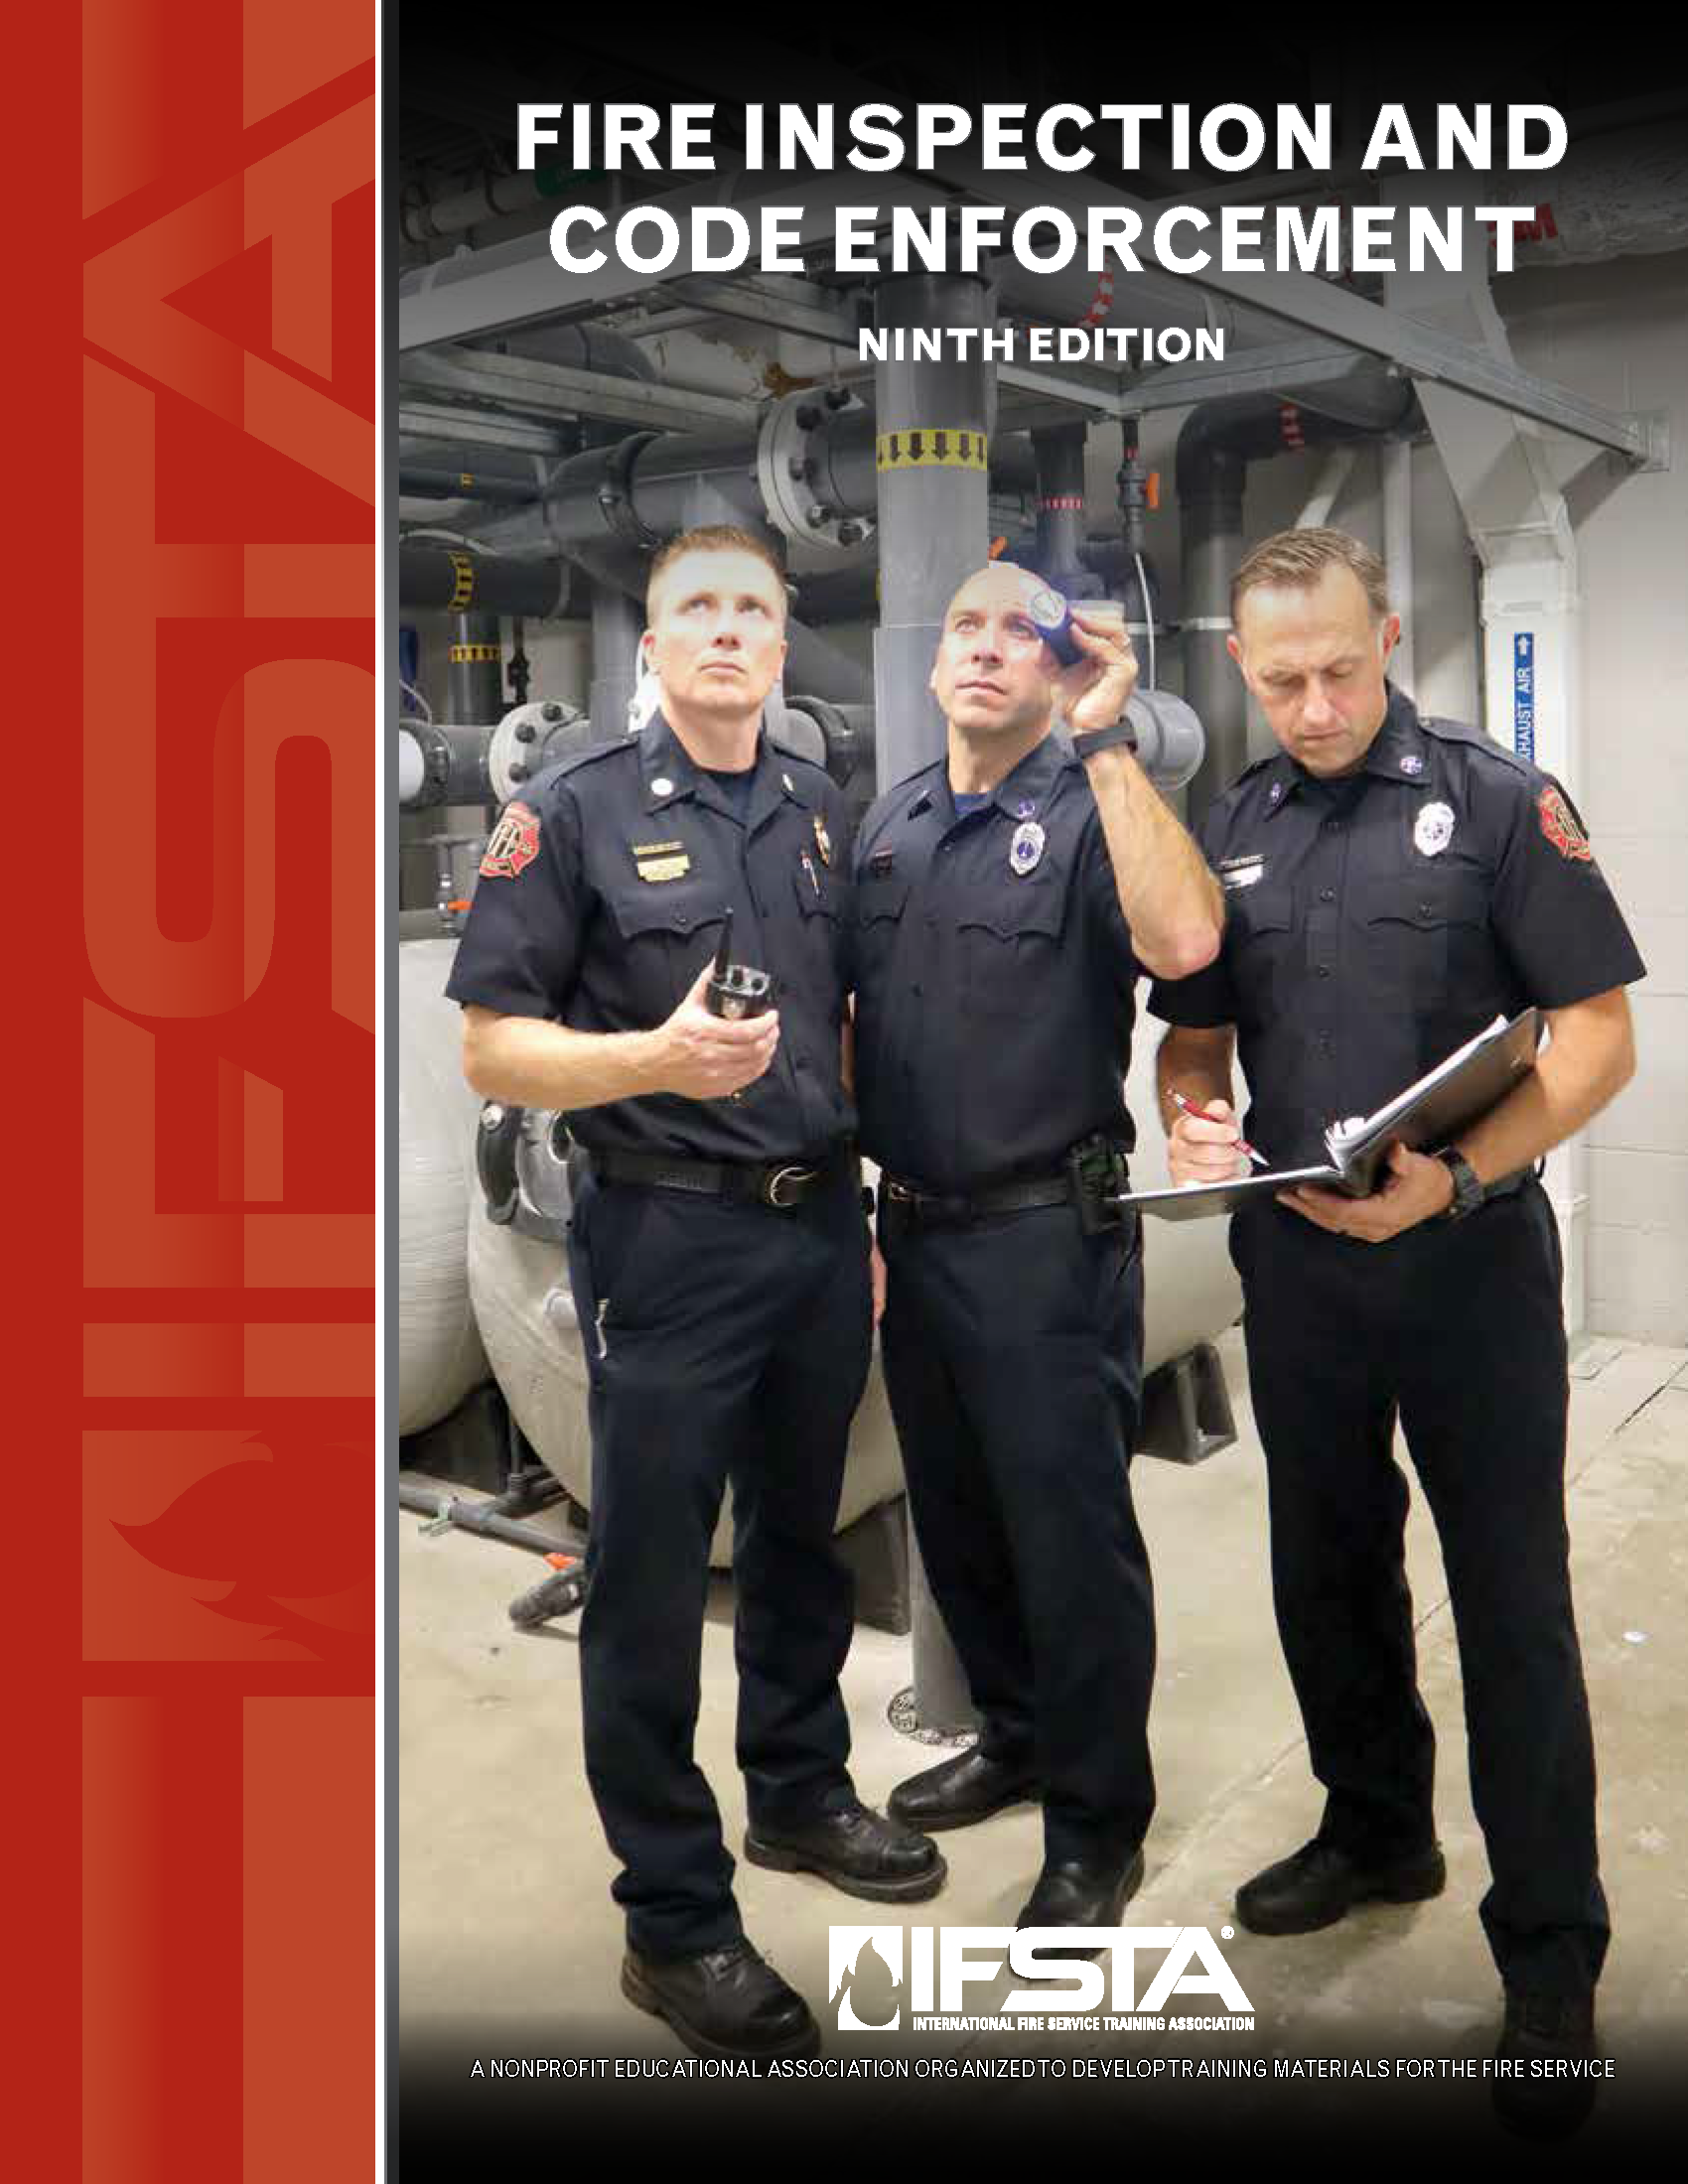 Fire Inspection and Code Enforcement, 9th Edition